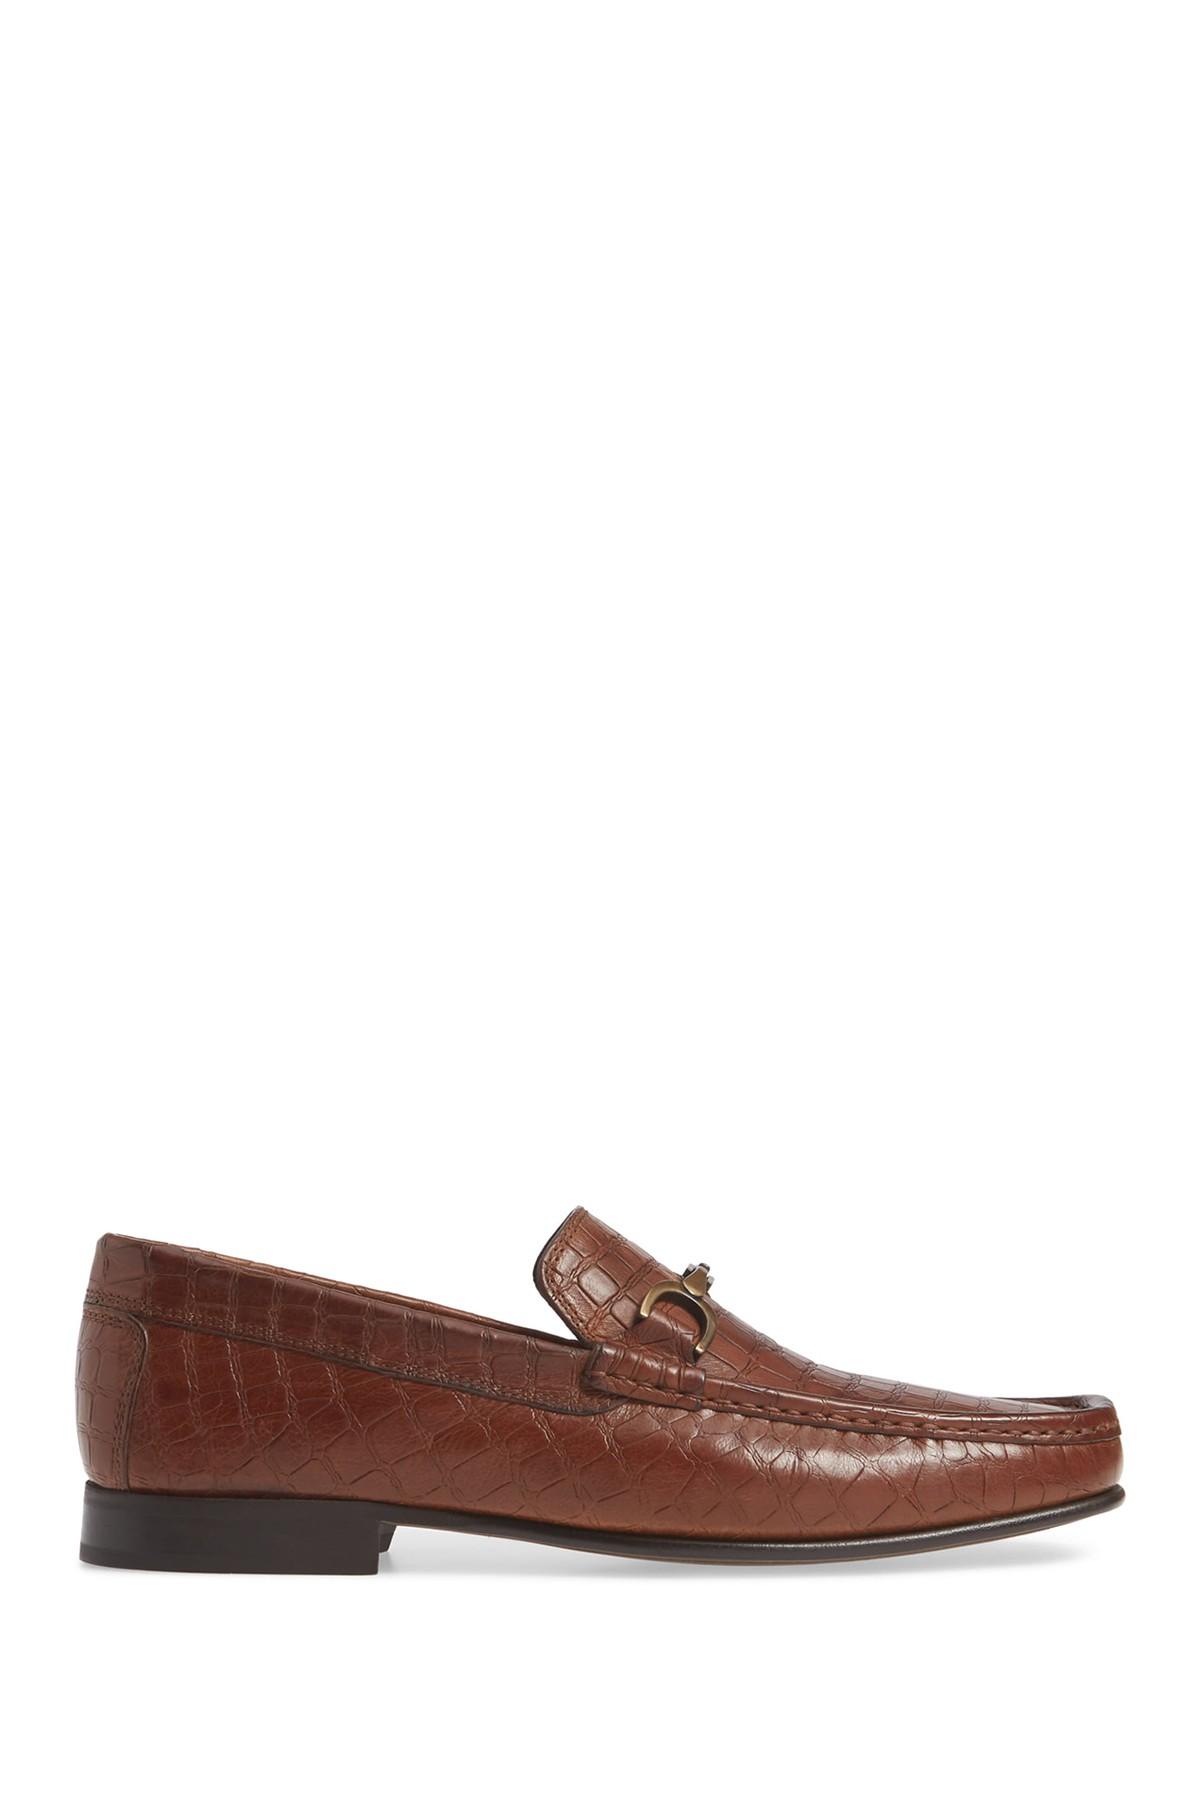 Donald J Pliner Darrin Croc Emhossed Leather Bit Loafer in Brown for ...